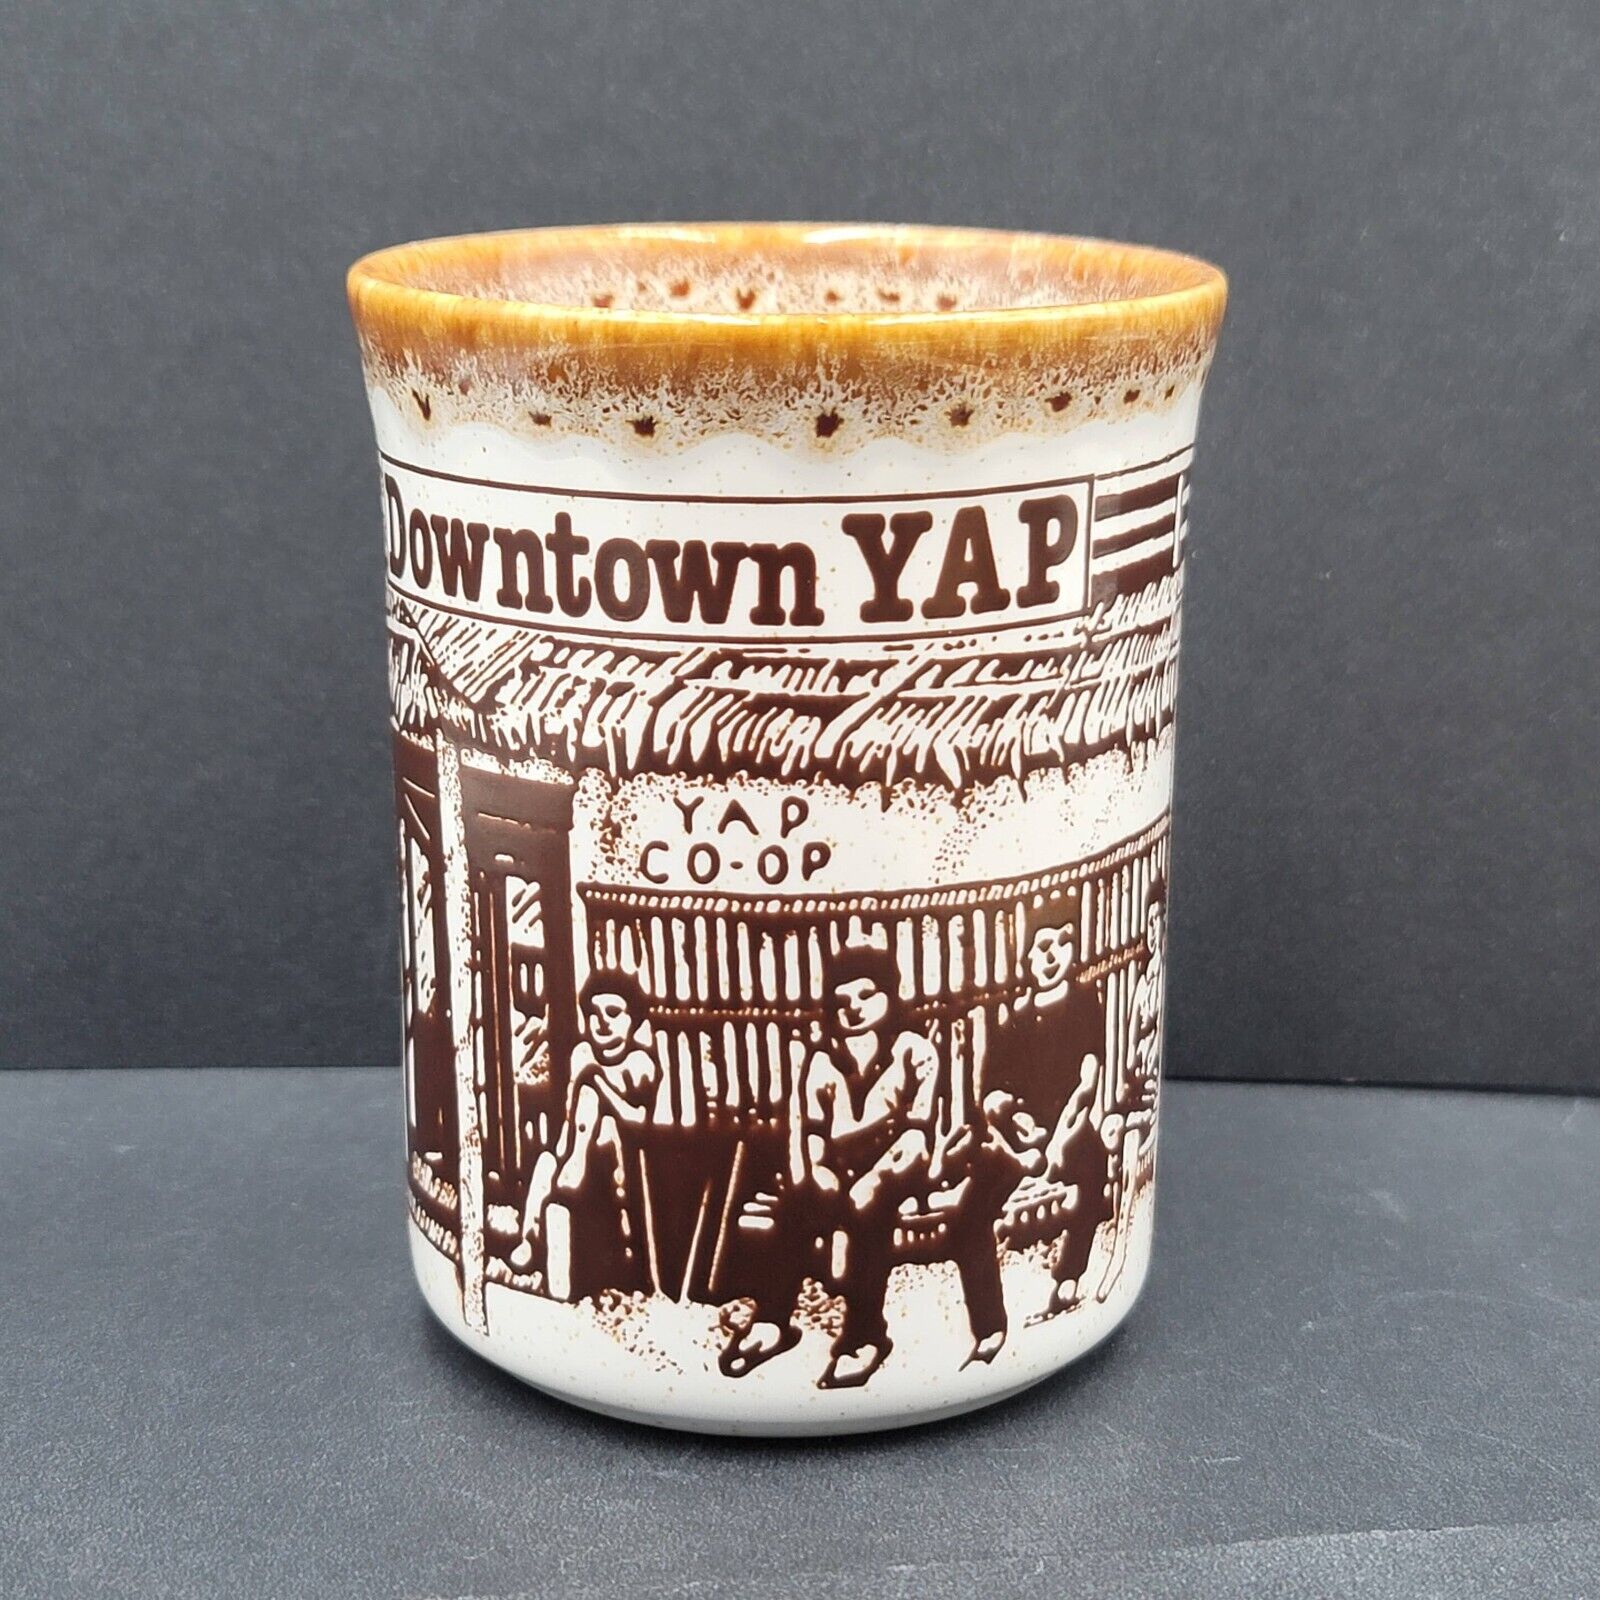 Vintage Downtown YAP Coffee Mug Cup Made in Wales The Welsh Beaker Company